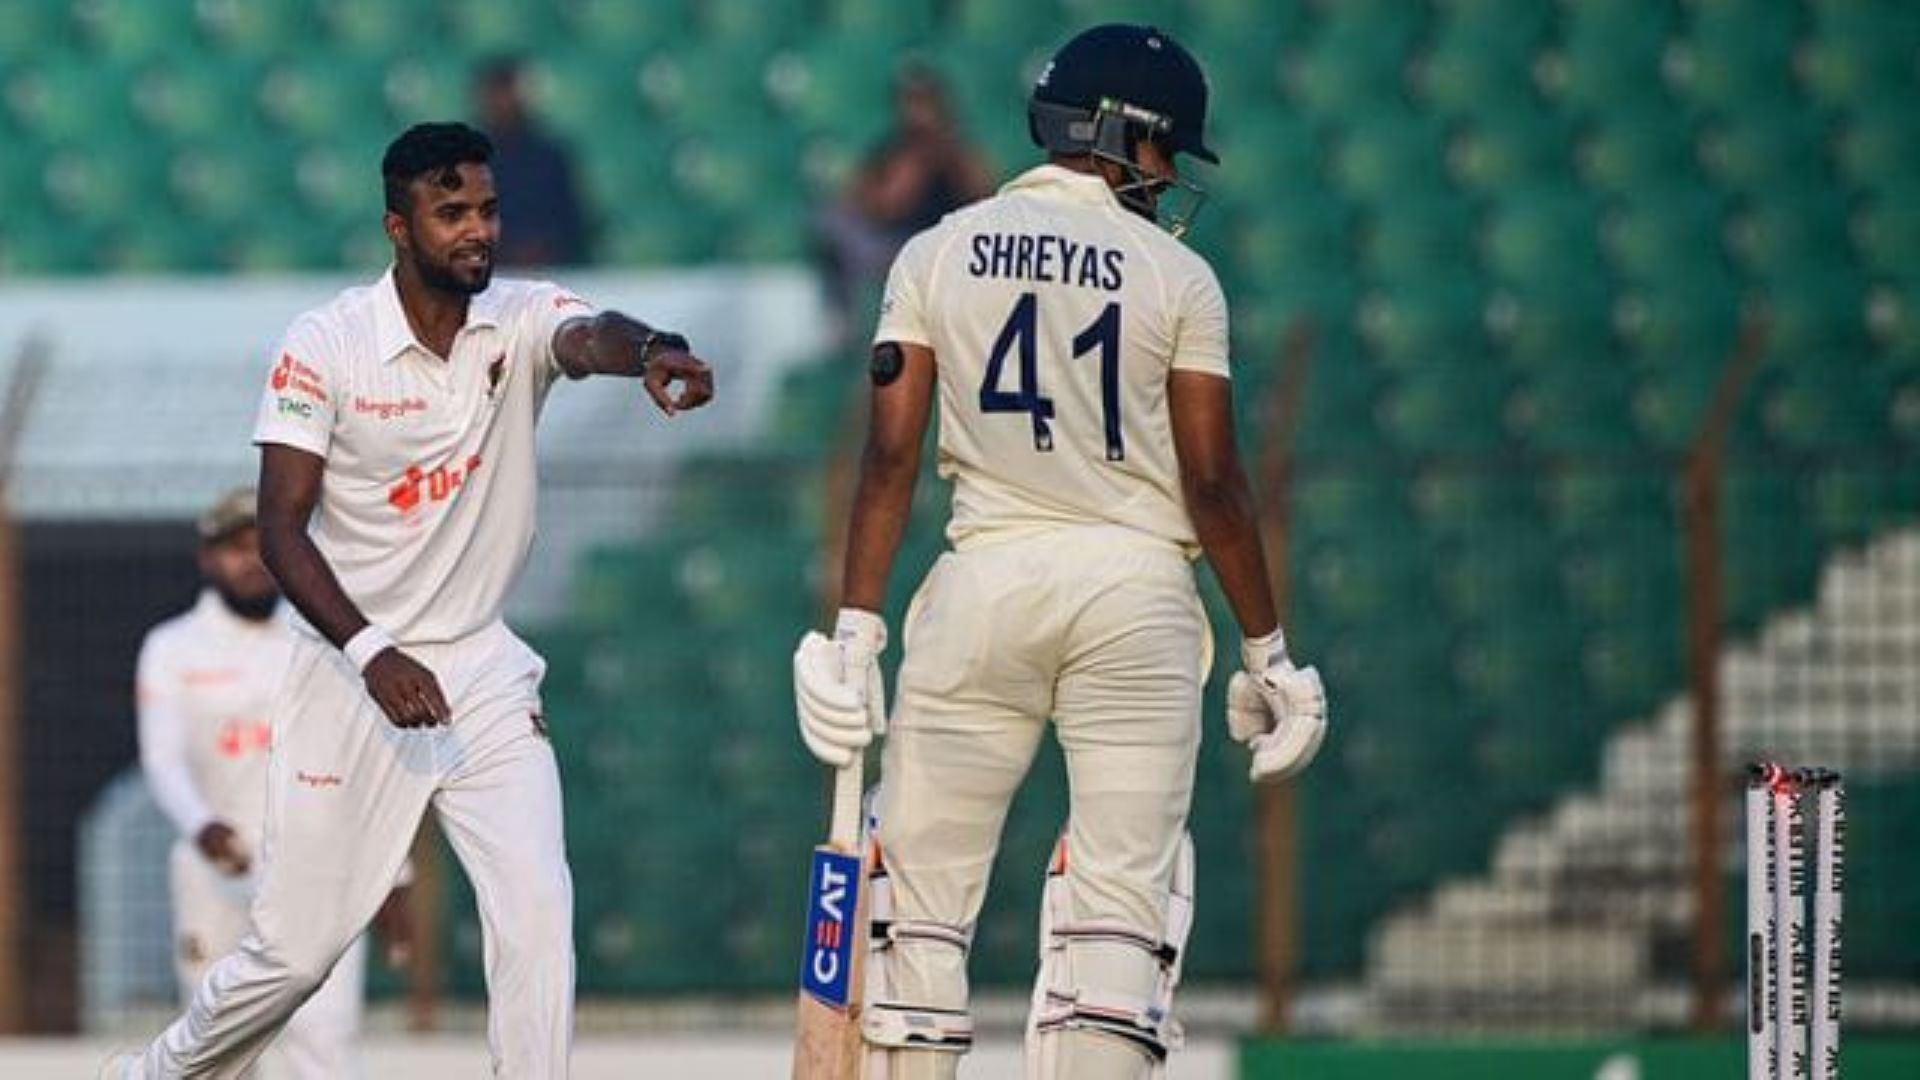 Shreyas Iyer had a fortuitous escape on Day 1 of the India-Bangladesh Test Match. [Pic Credit - ICC]